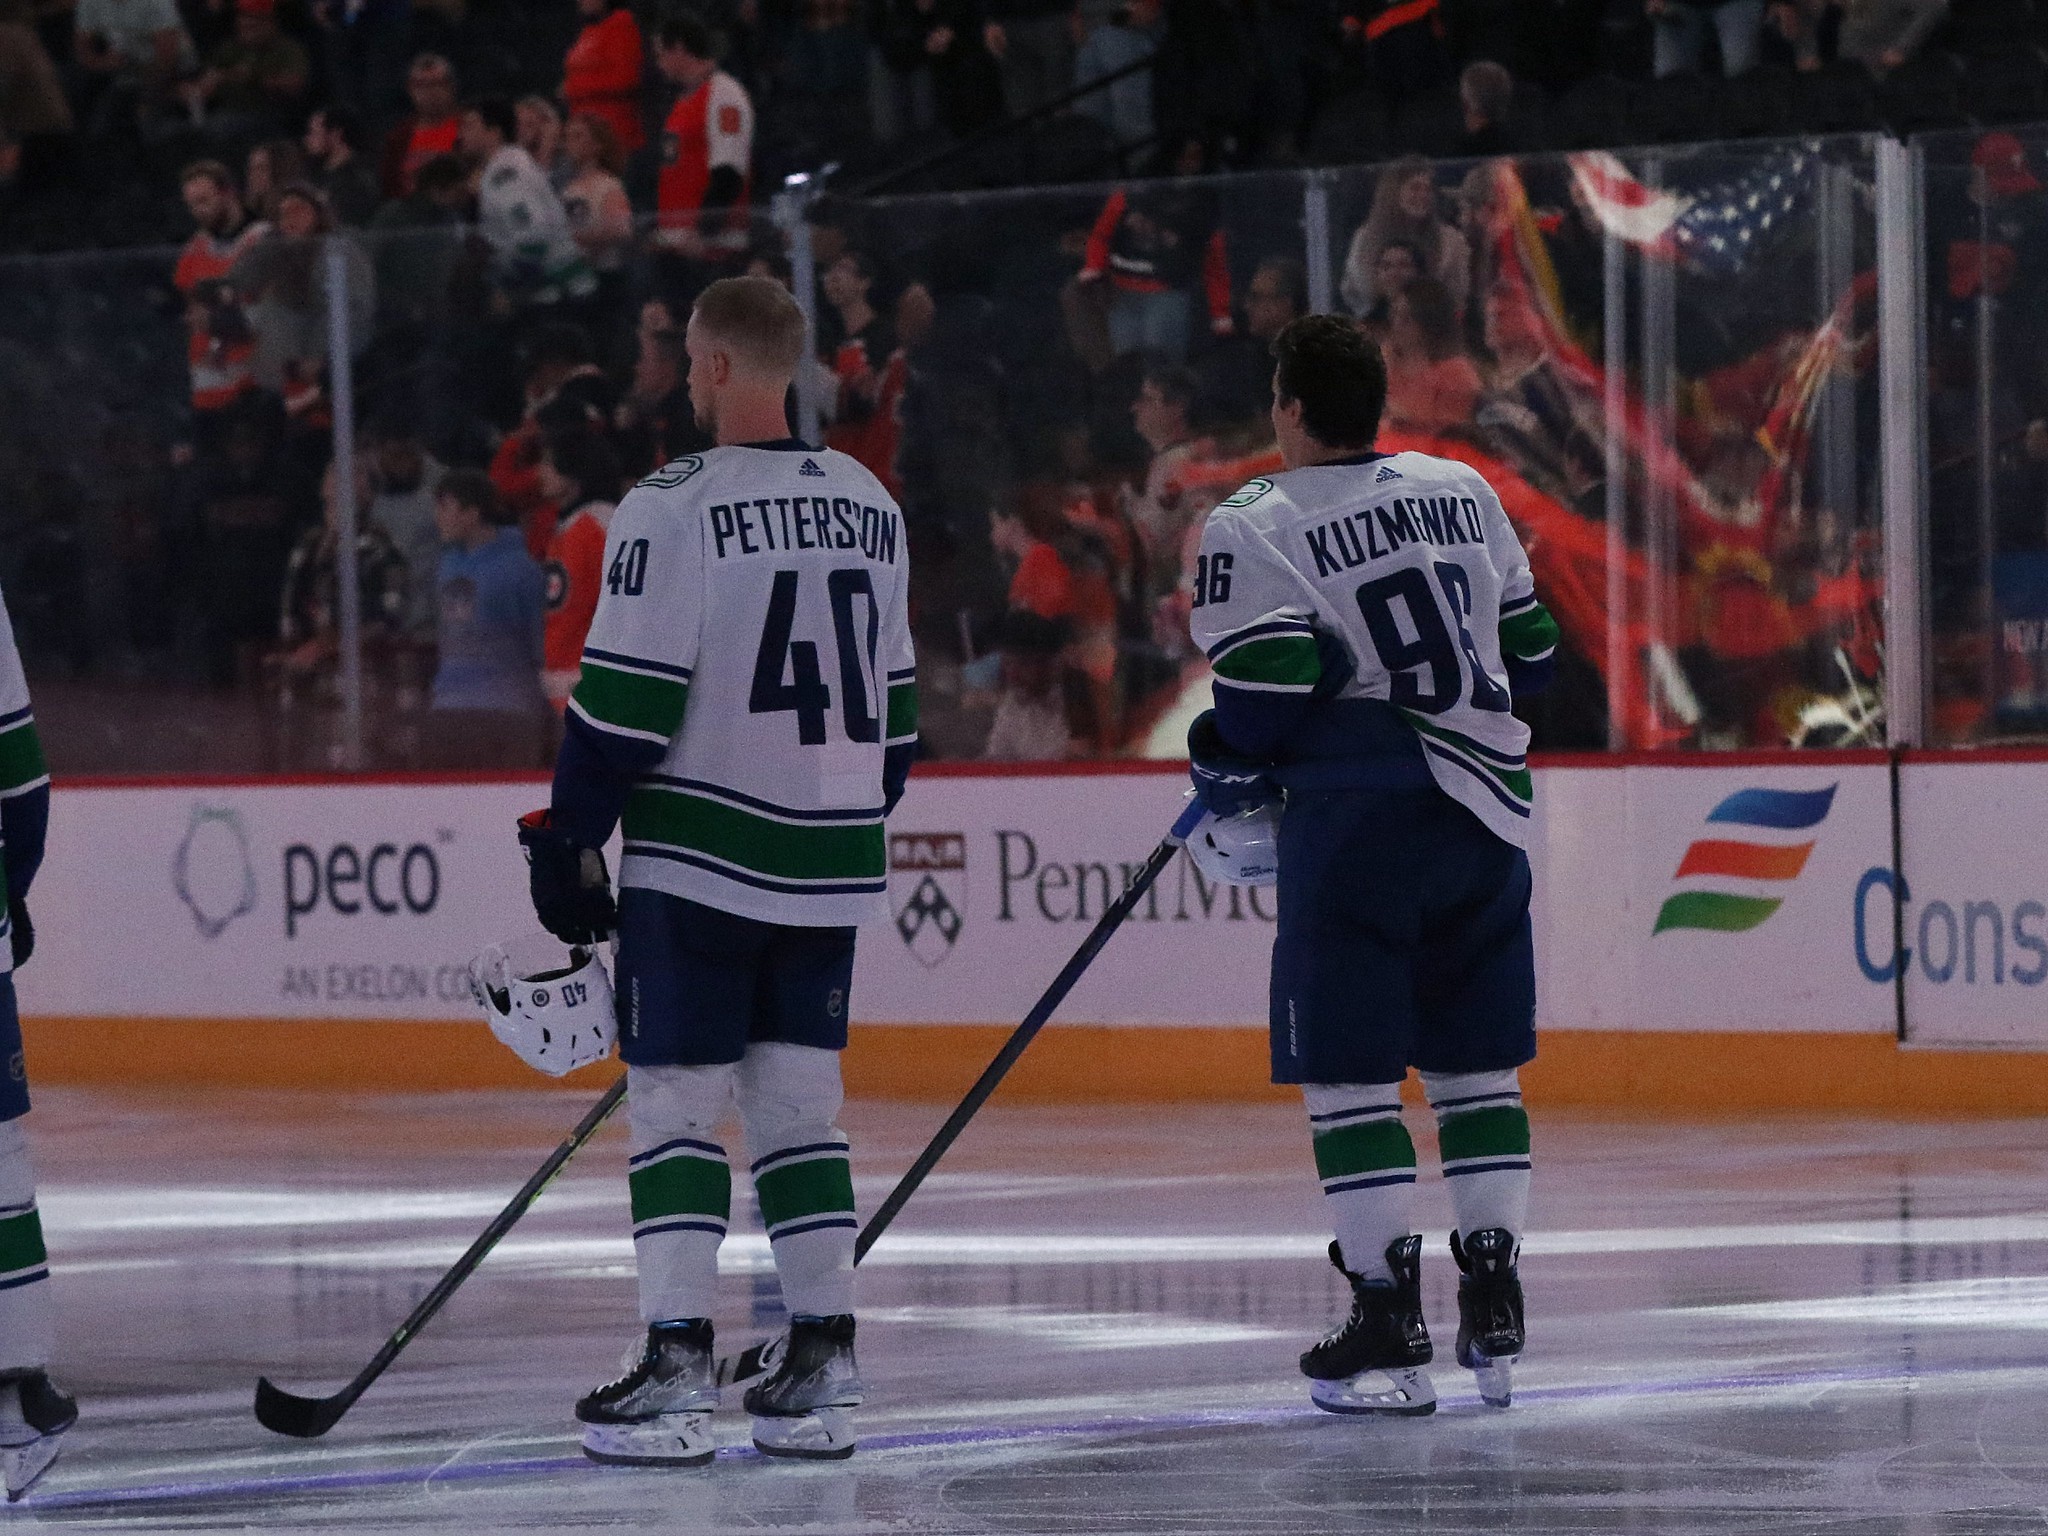 Vancouver Canucks' awful losses: Ducks setback far from worst ever